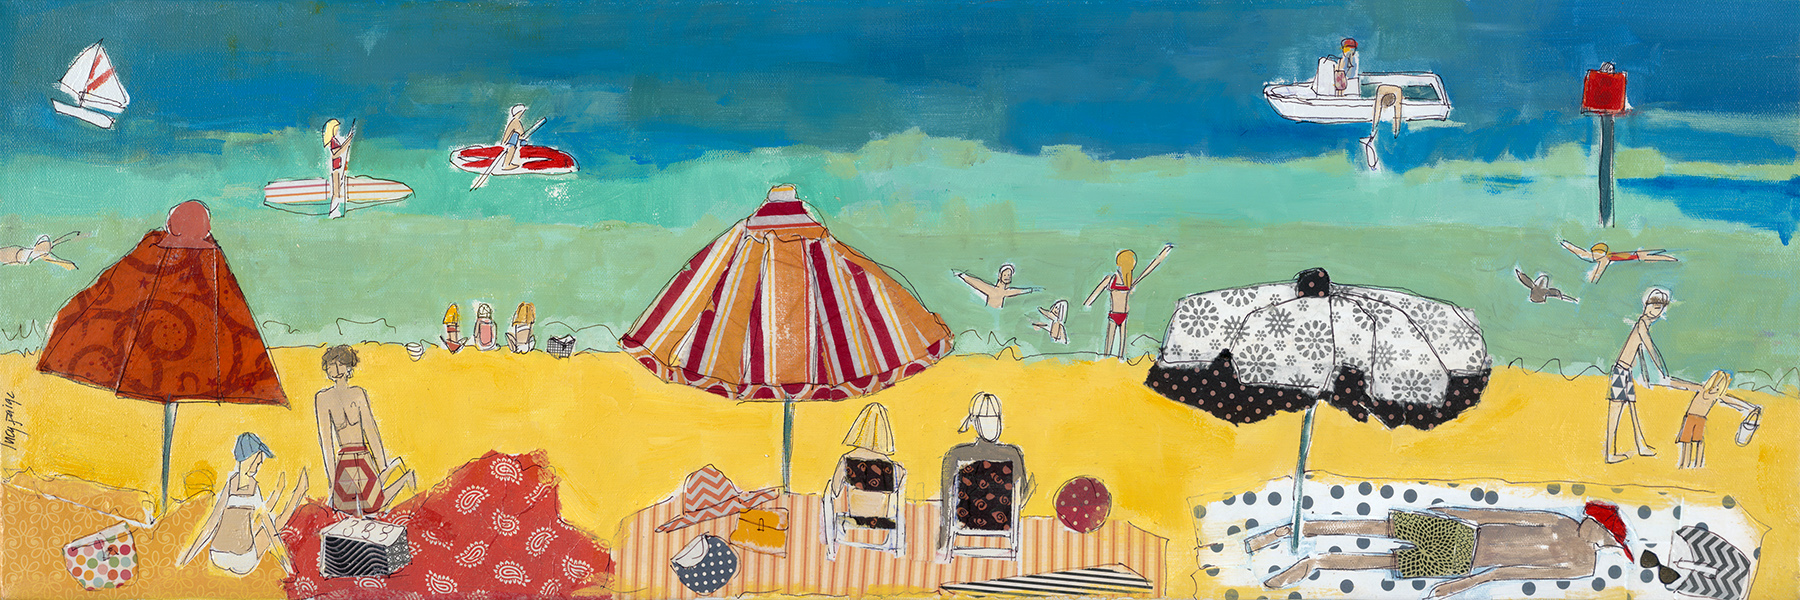 lucy paige artist key west beach day series collage Afternoon at Smathers Beach .jpg